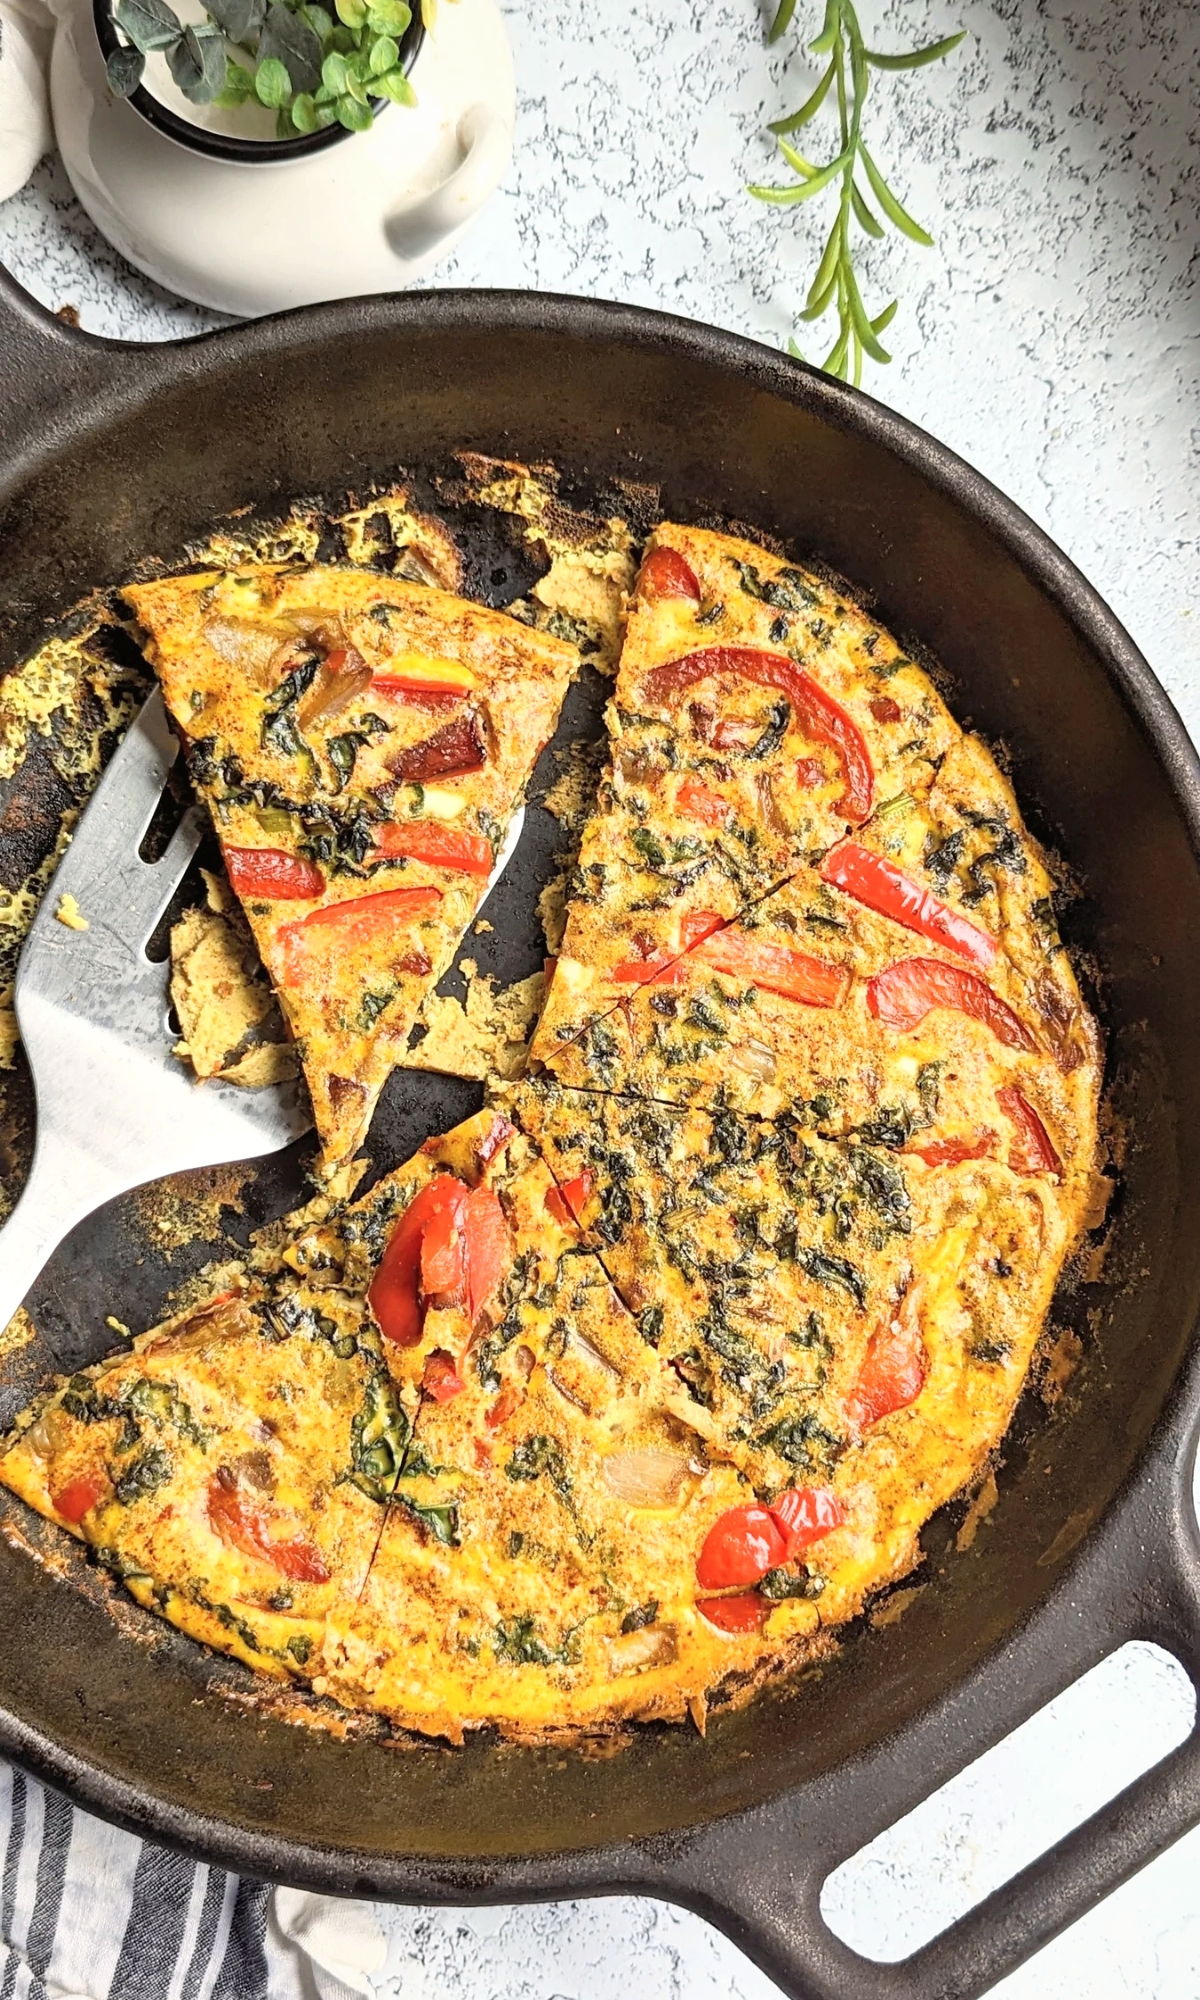 Mediterranean egg recipe in a cast iron skillet with red bell pepper kale caramelized onions and red chili pepper flakes, a no salt breakfast idea.